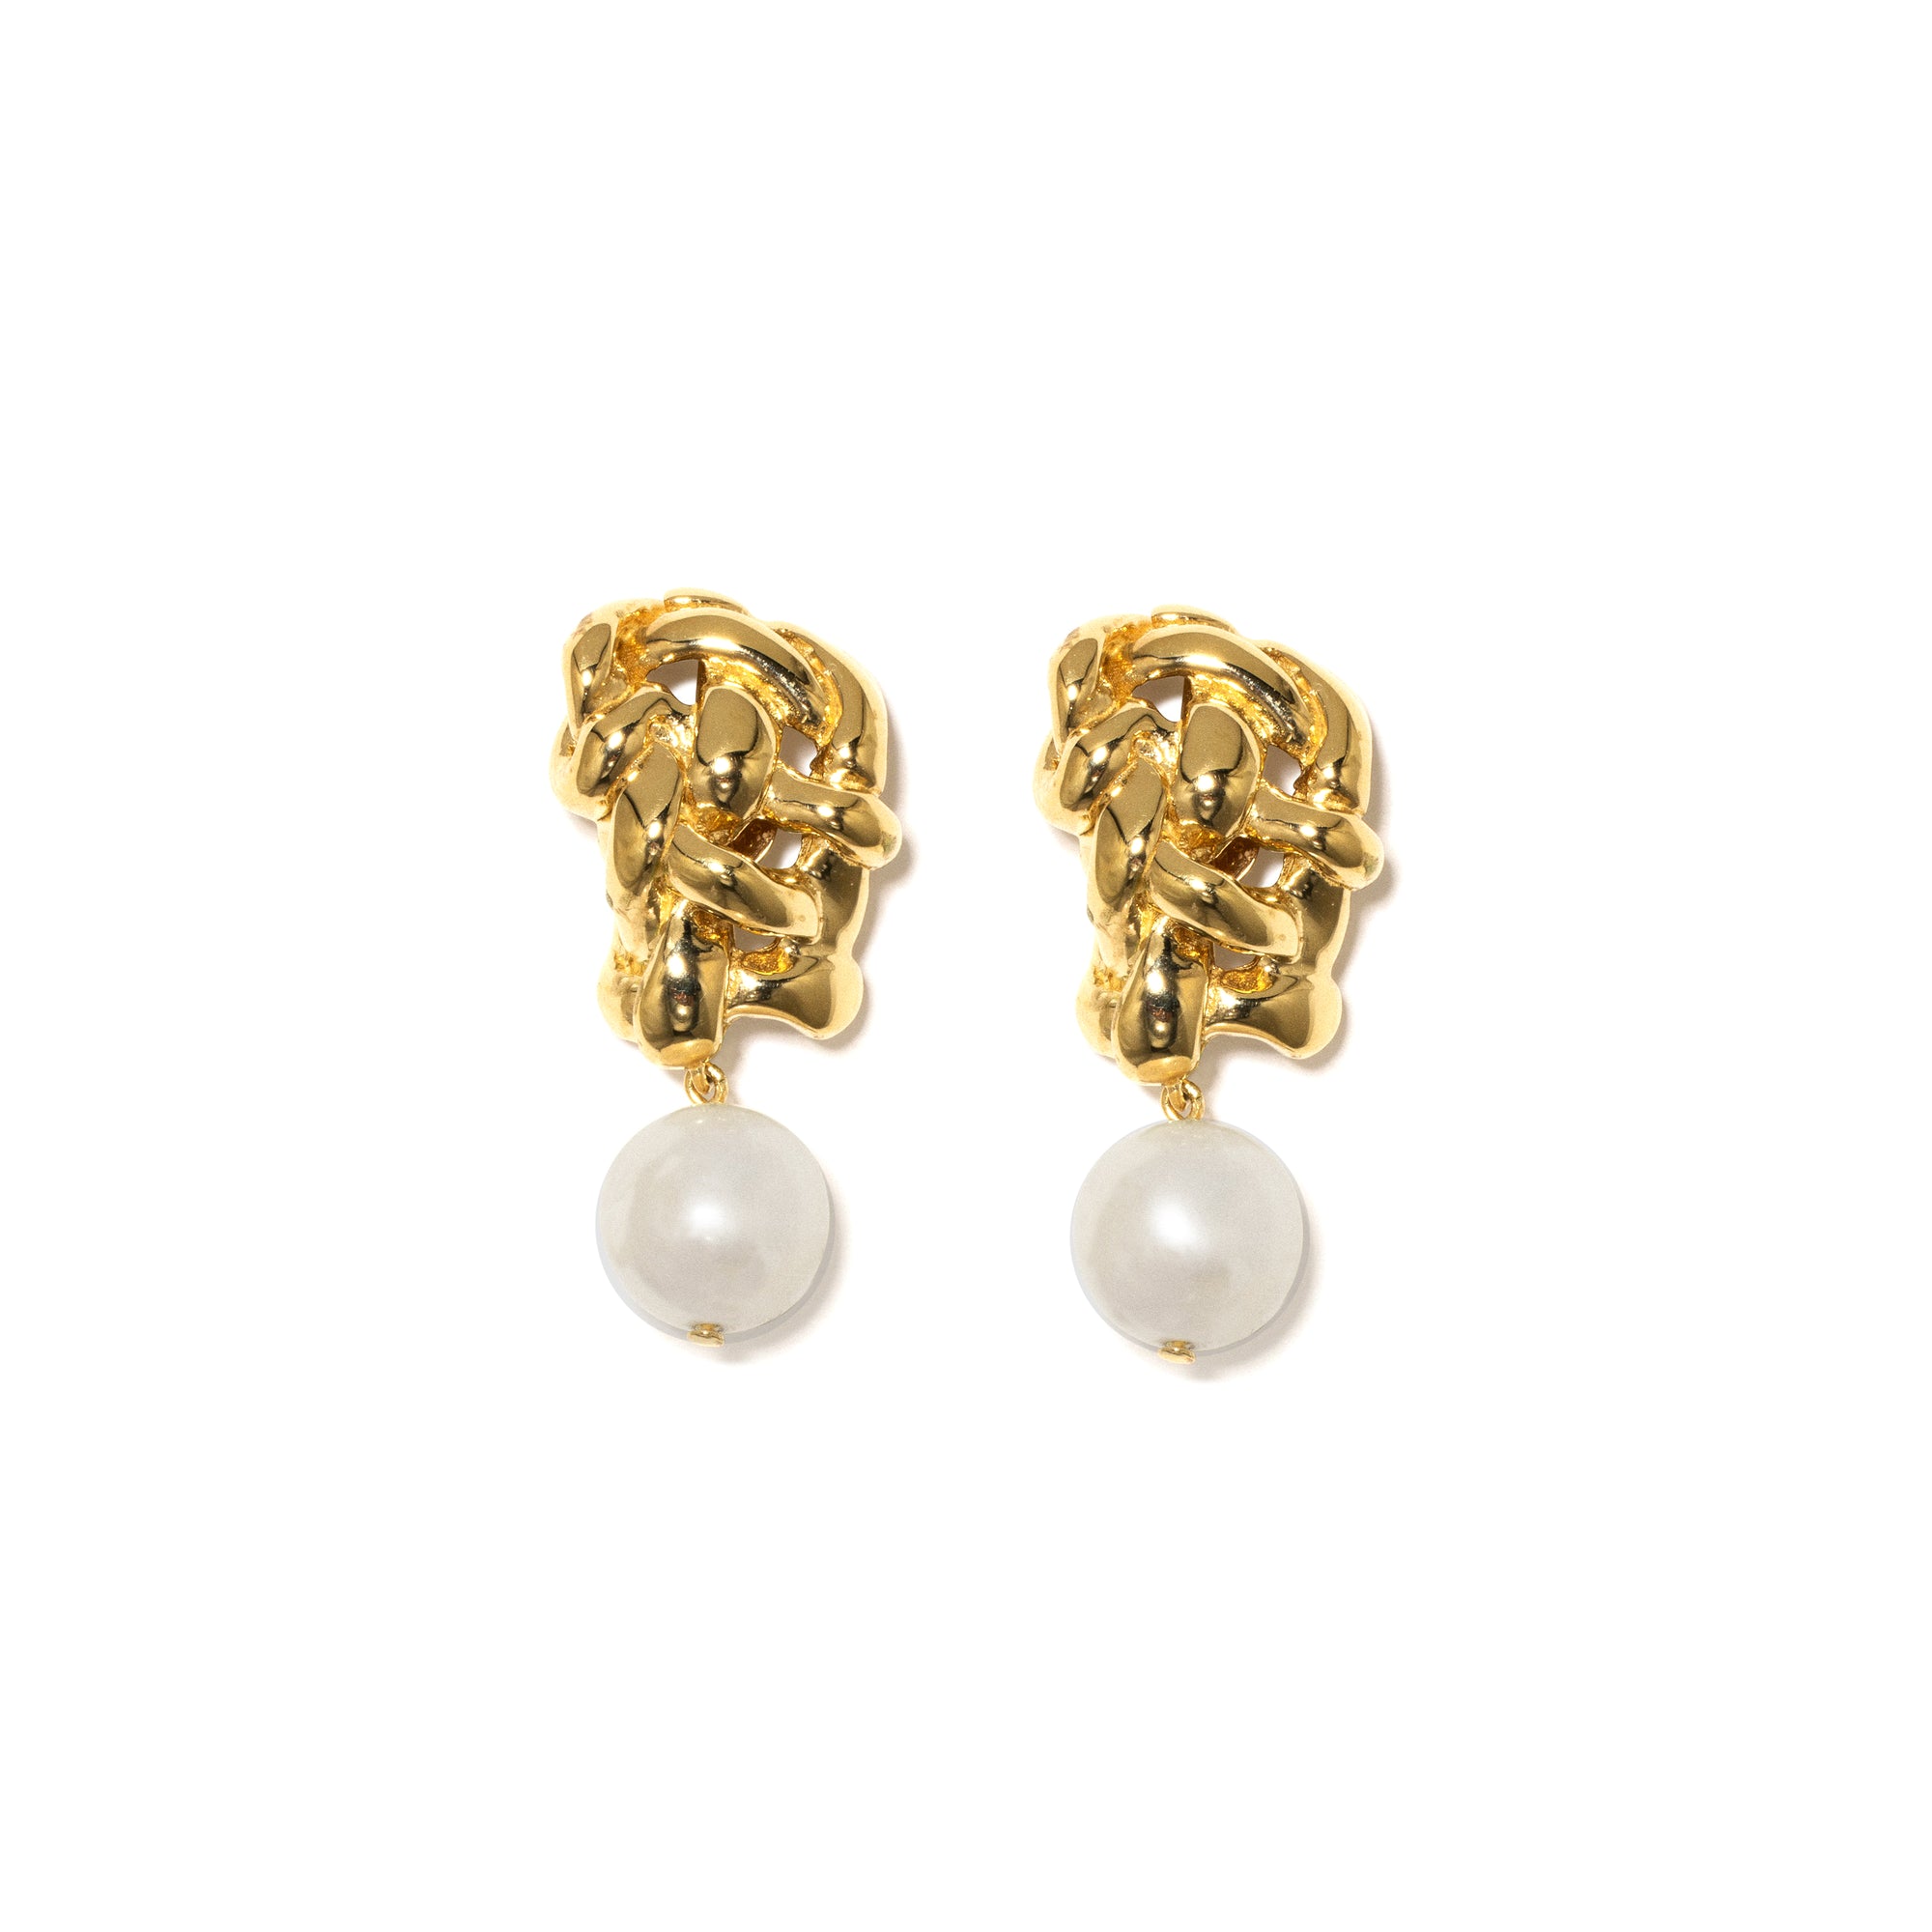 Completedworks - Women's A Shimmer of Possibility Earrings - (Pearl/Gold Vermeil) view 1